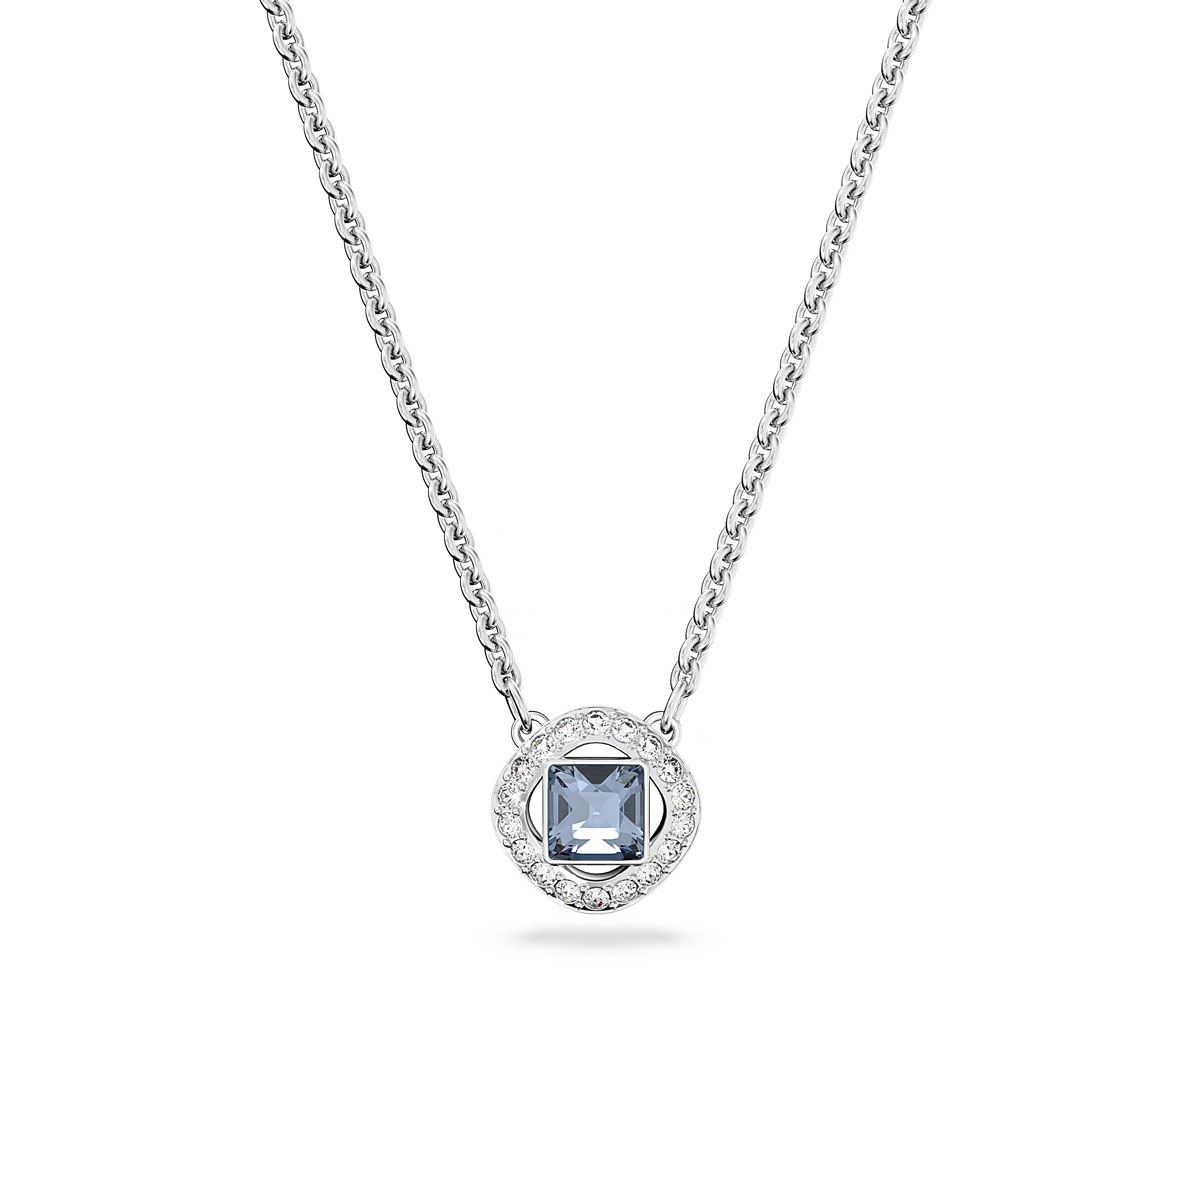 Swarovski Cool Blue Crystal and Rhodium Angelic Square Necklace